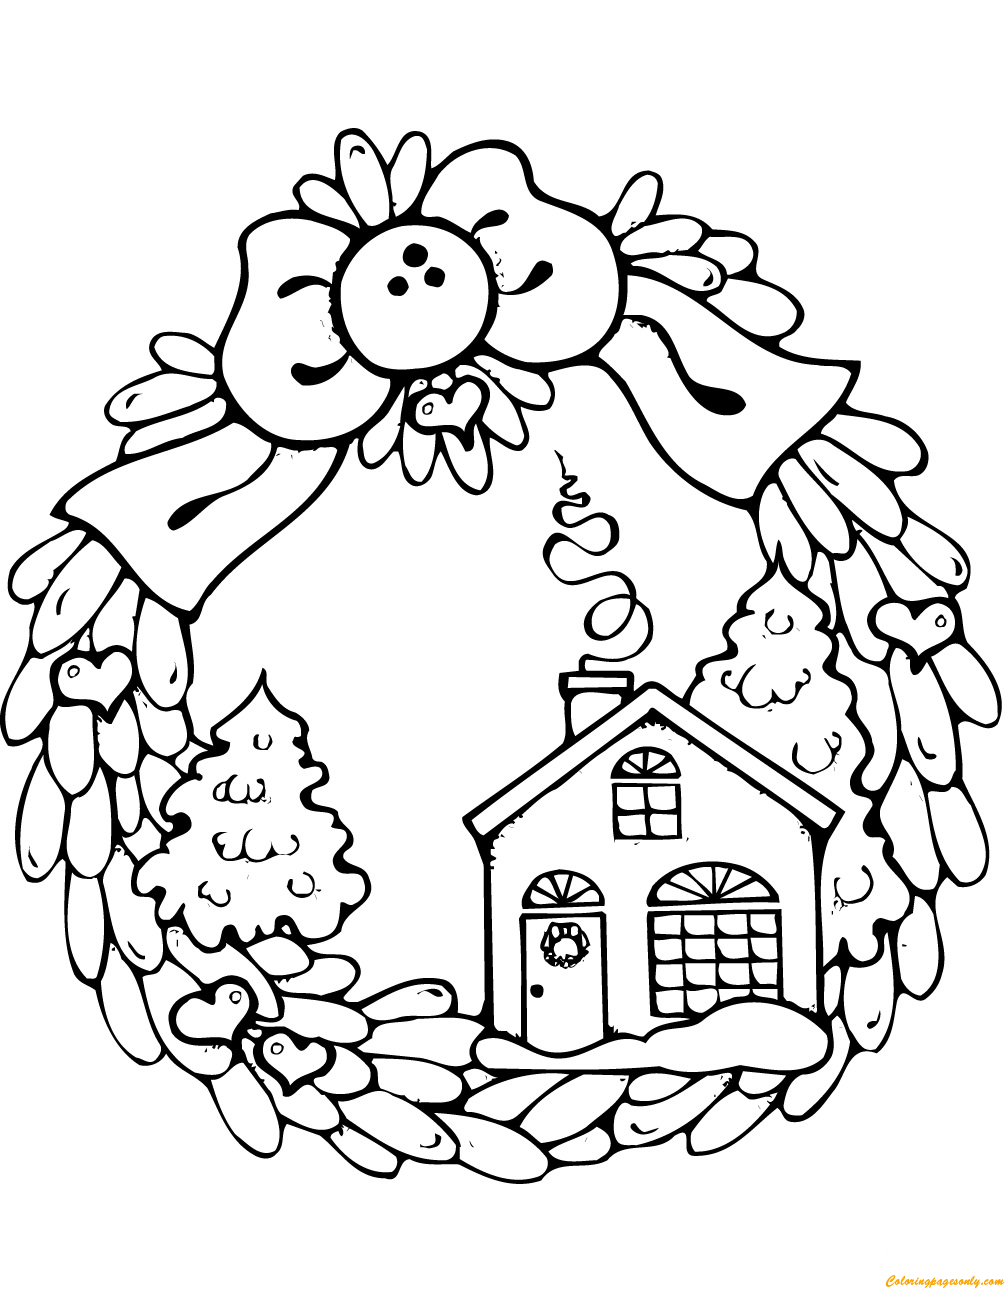 Gingerbread House Christmas Wreath Coloring Page - Free ...